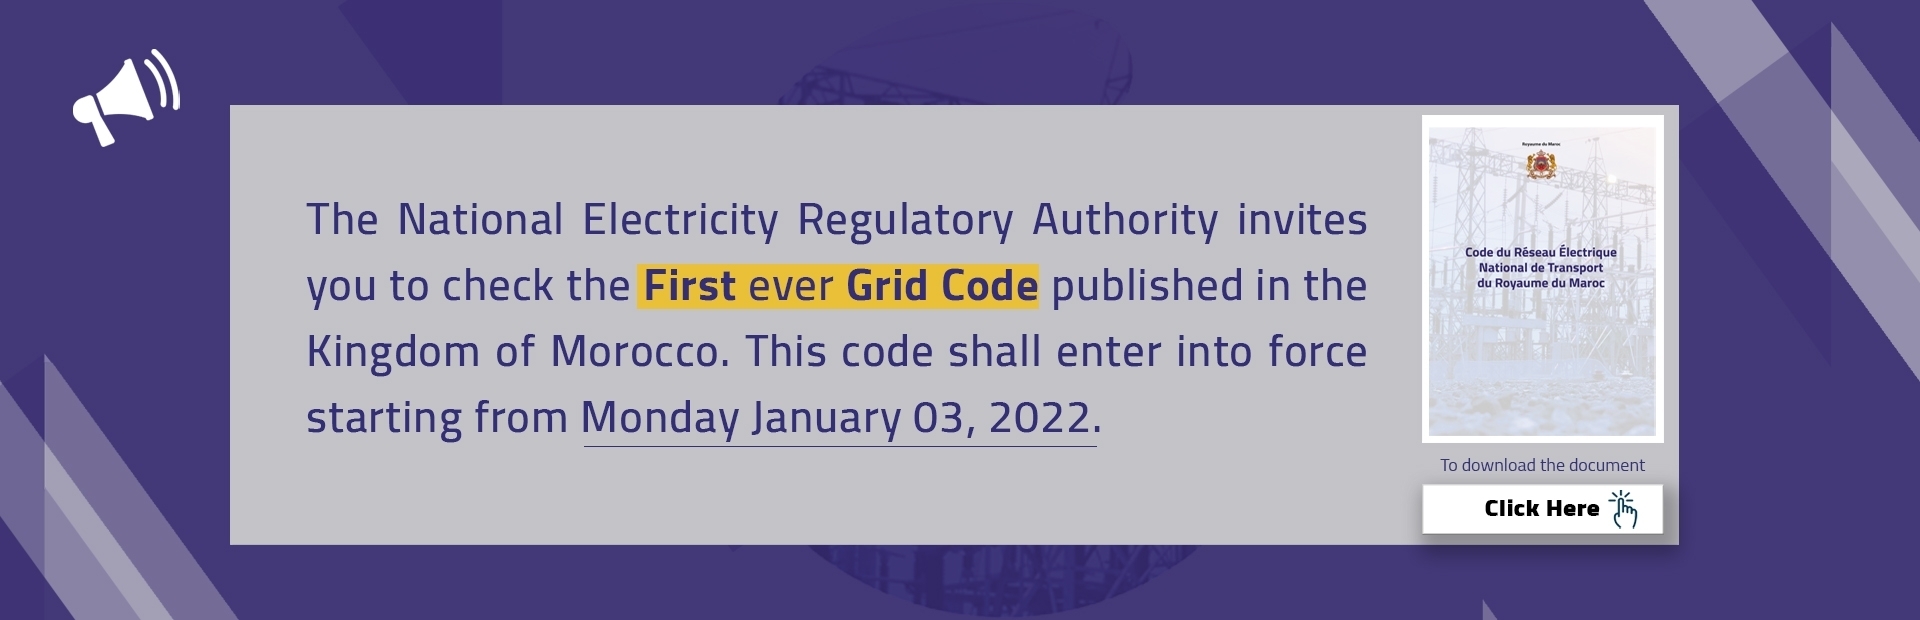 Publication of the Grid Code